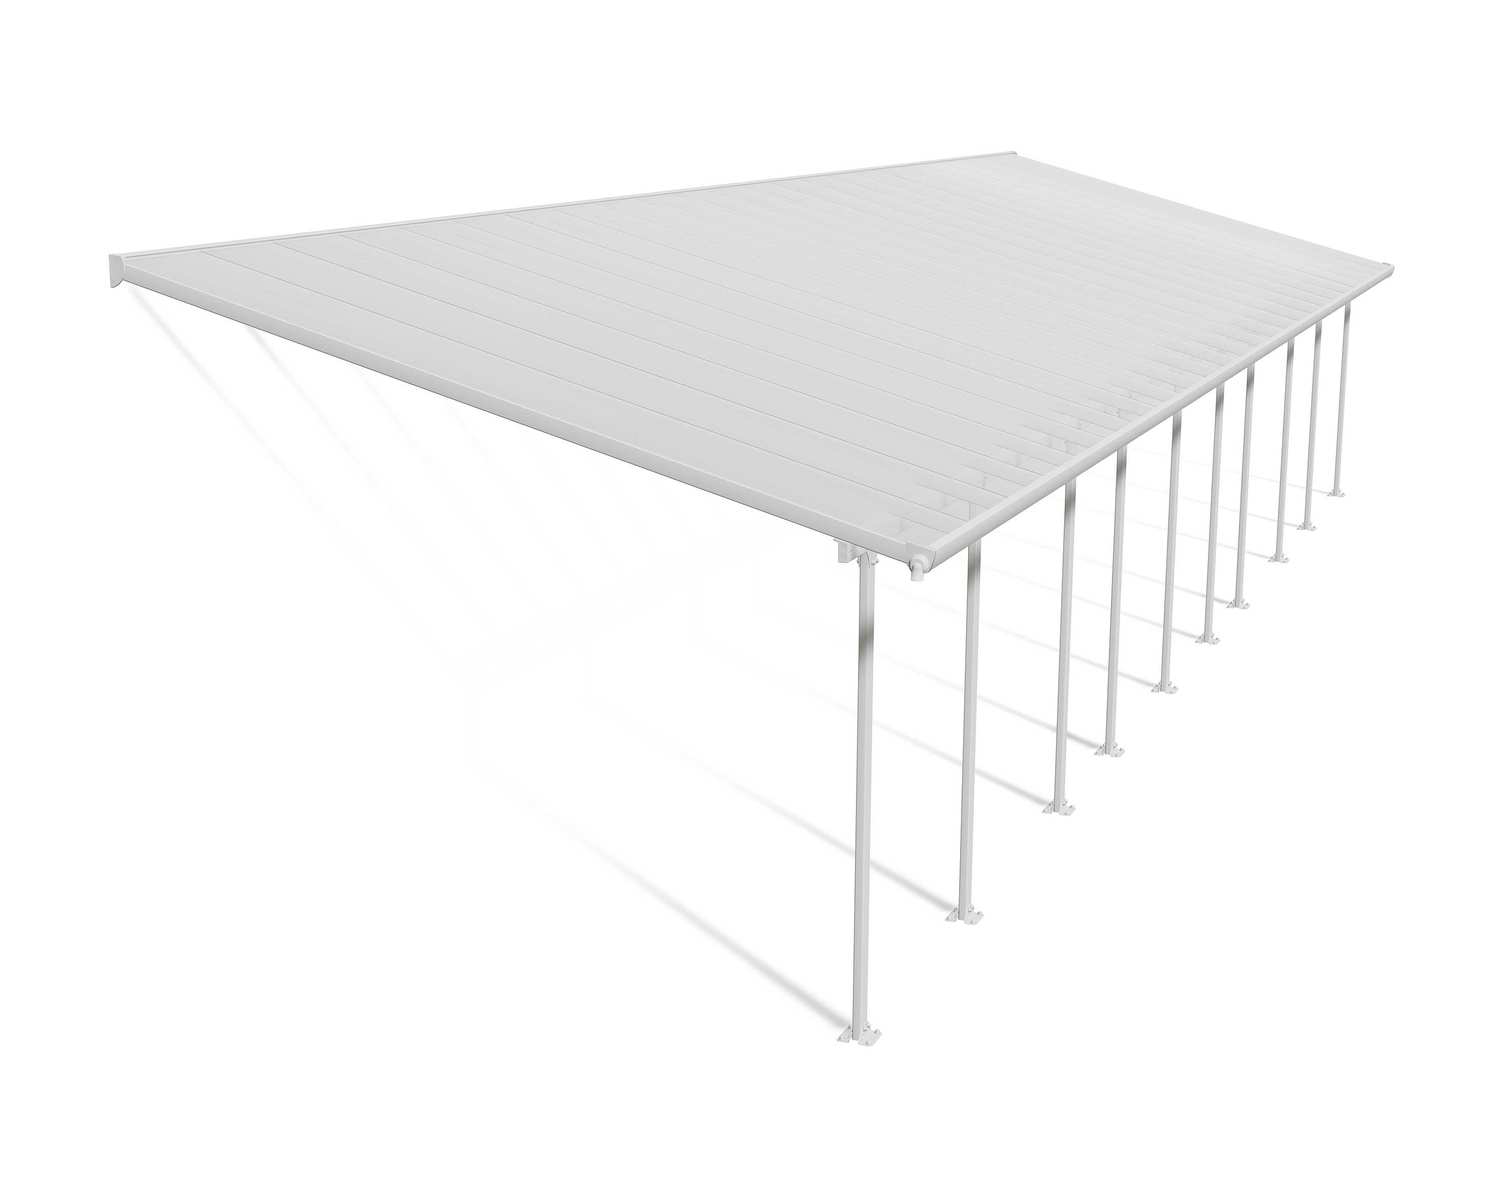 Patio Cover Kit Feria 4 ft. x 14.56 ft. White Structure & Clear Multi Wall Glazing